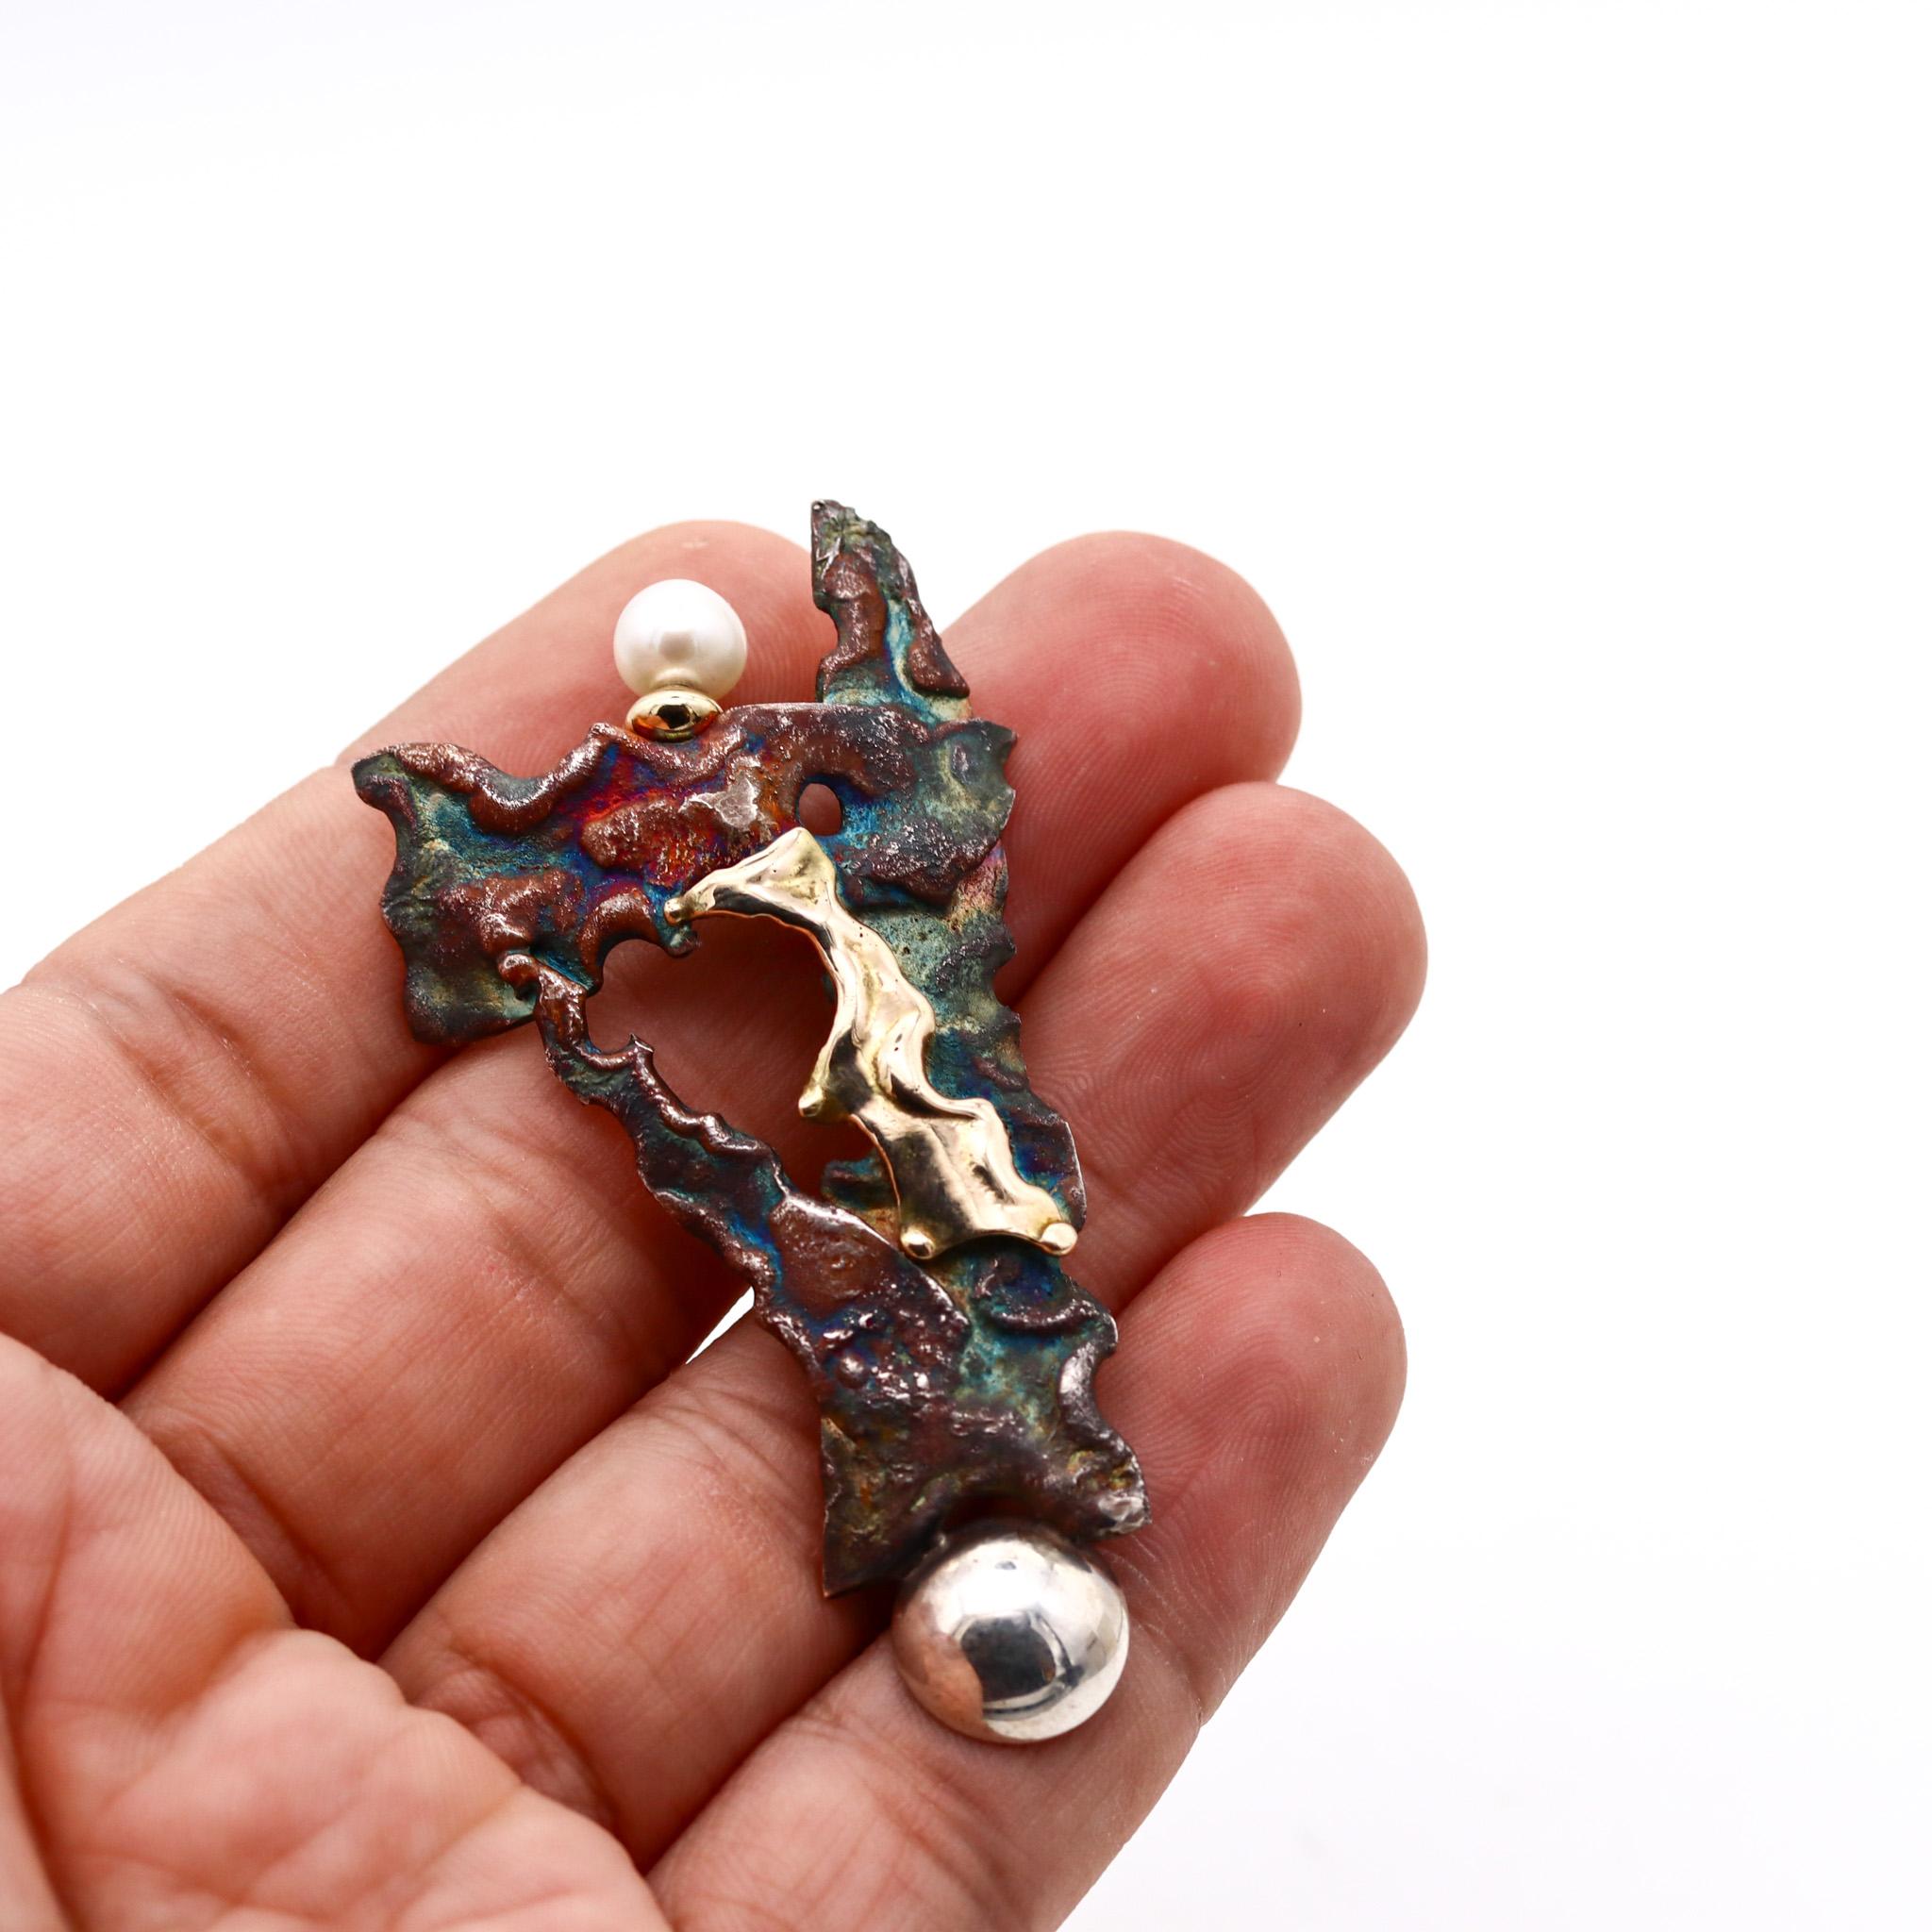 Gilles Maurel Organic Brooch In Oxidized Copper And 18kt Gold With One Pearl In Excellent Condition For Sale In Miami, FL